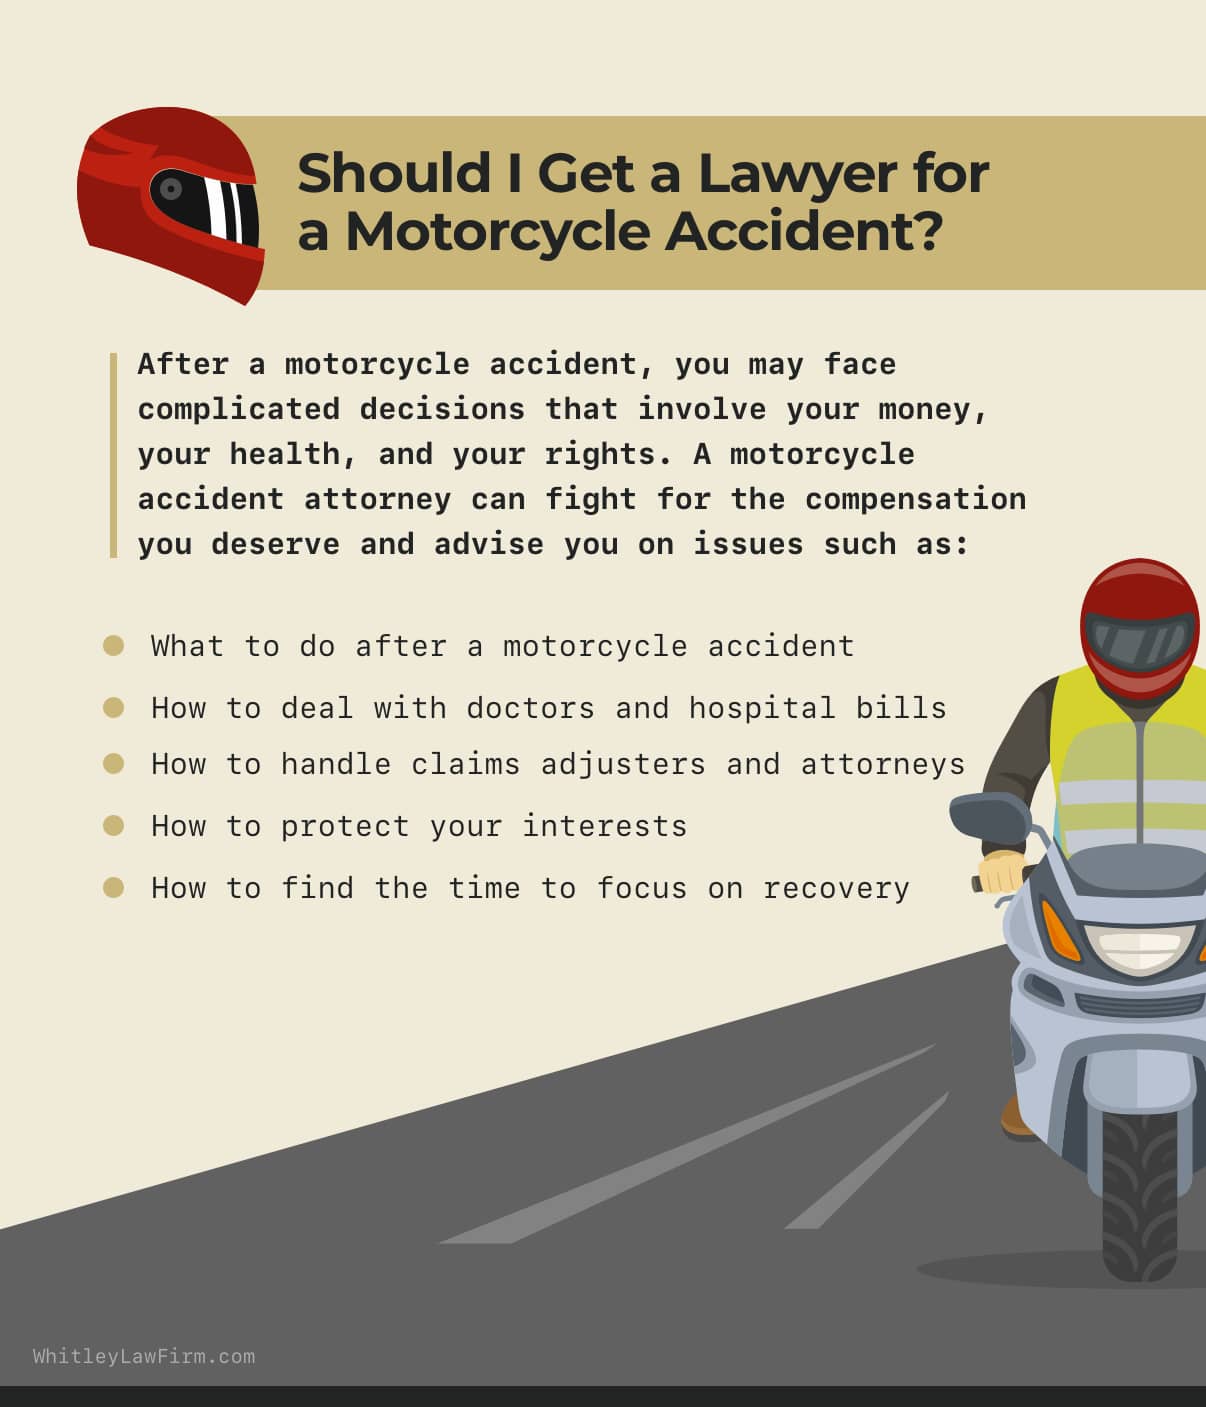 Should I Get a Lawyer for a Motorcycle Accident? | Whitley Law Firm